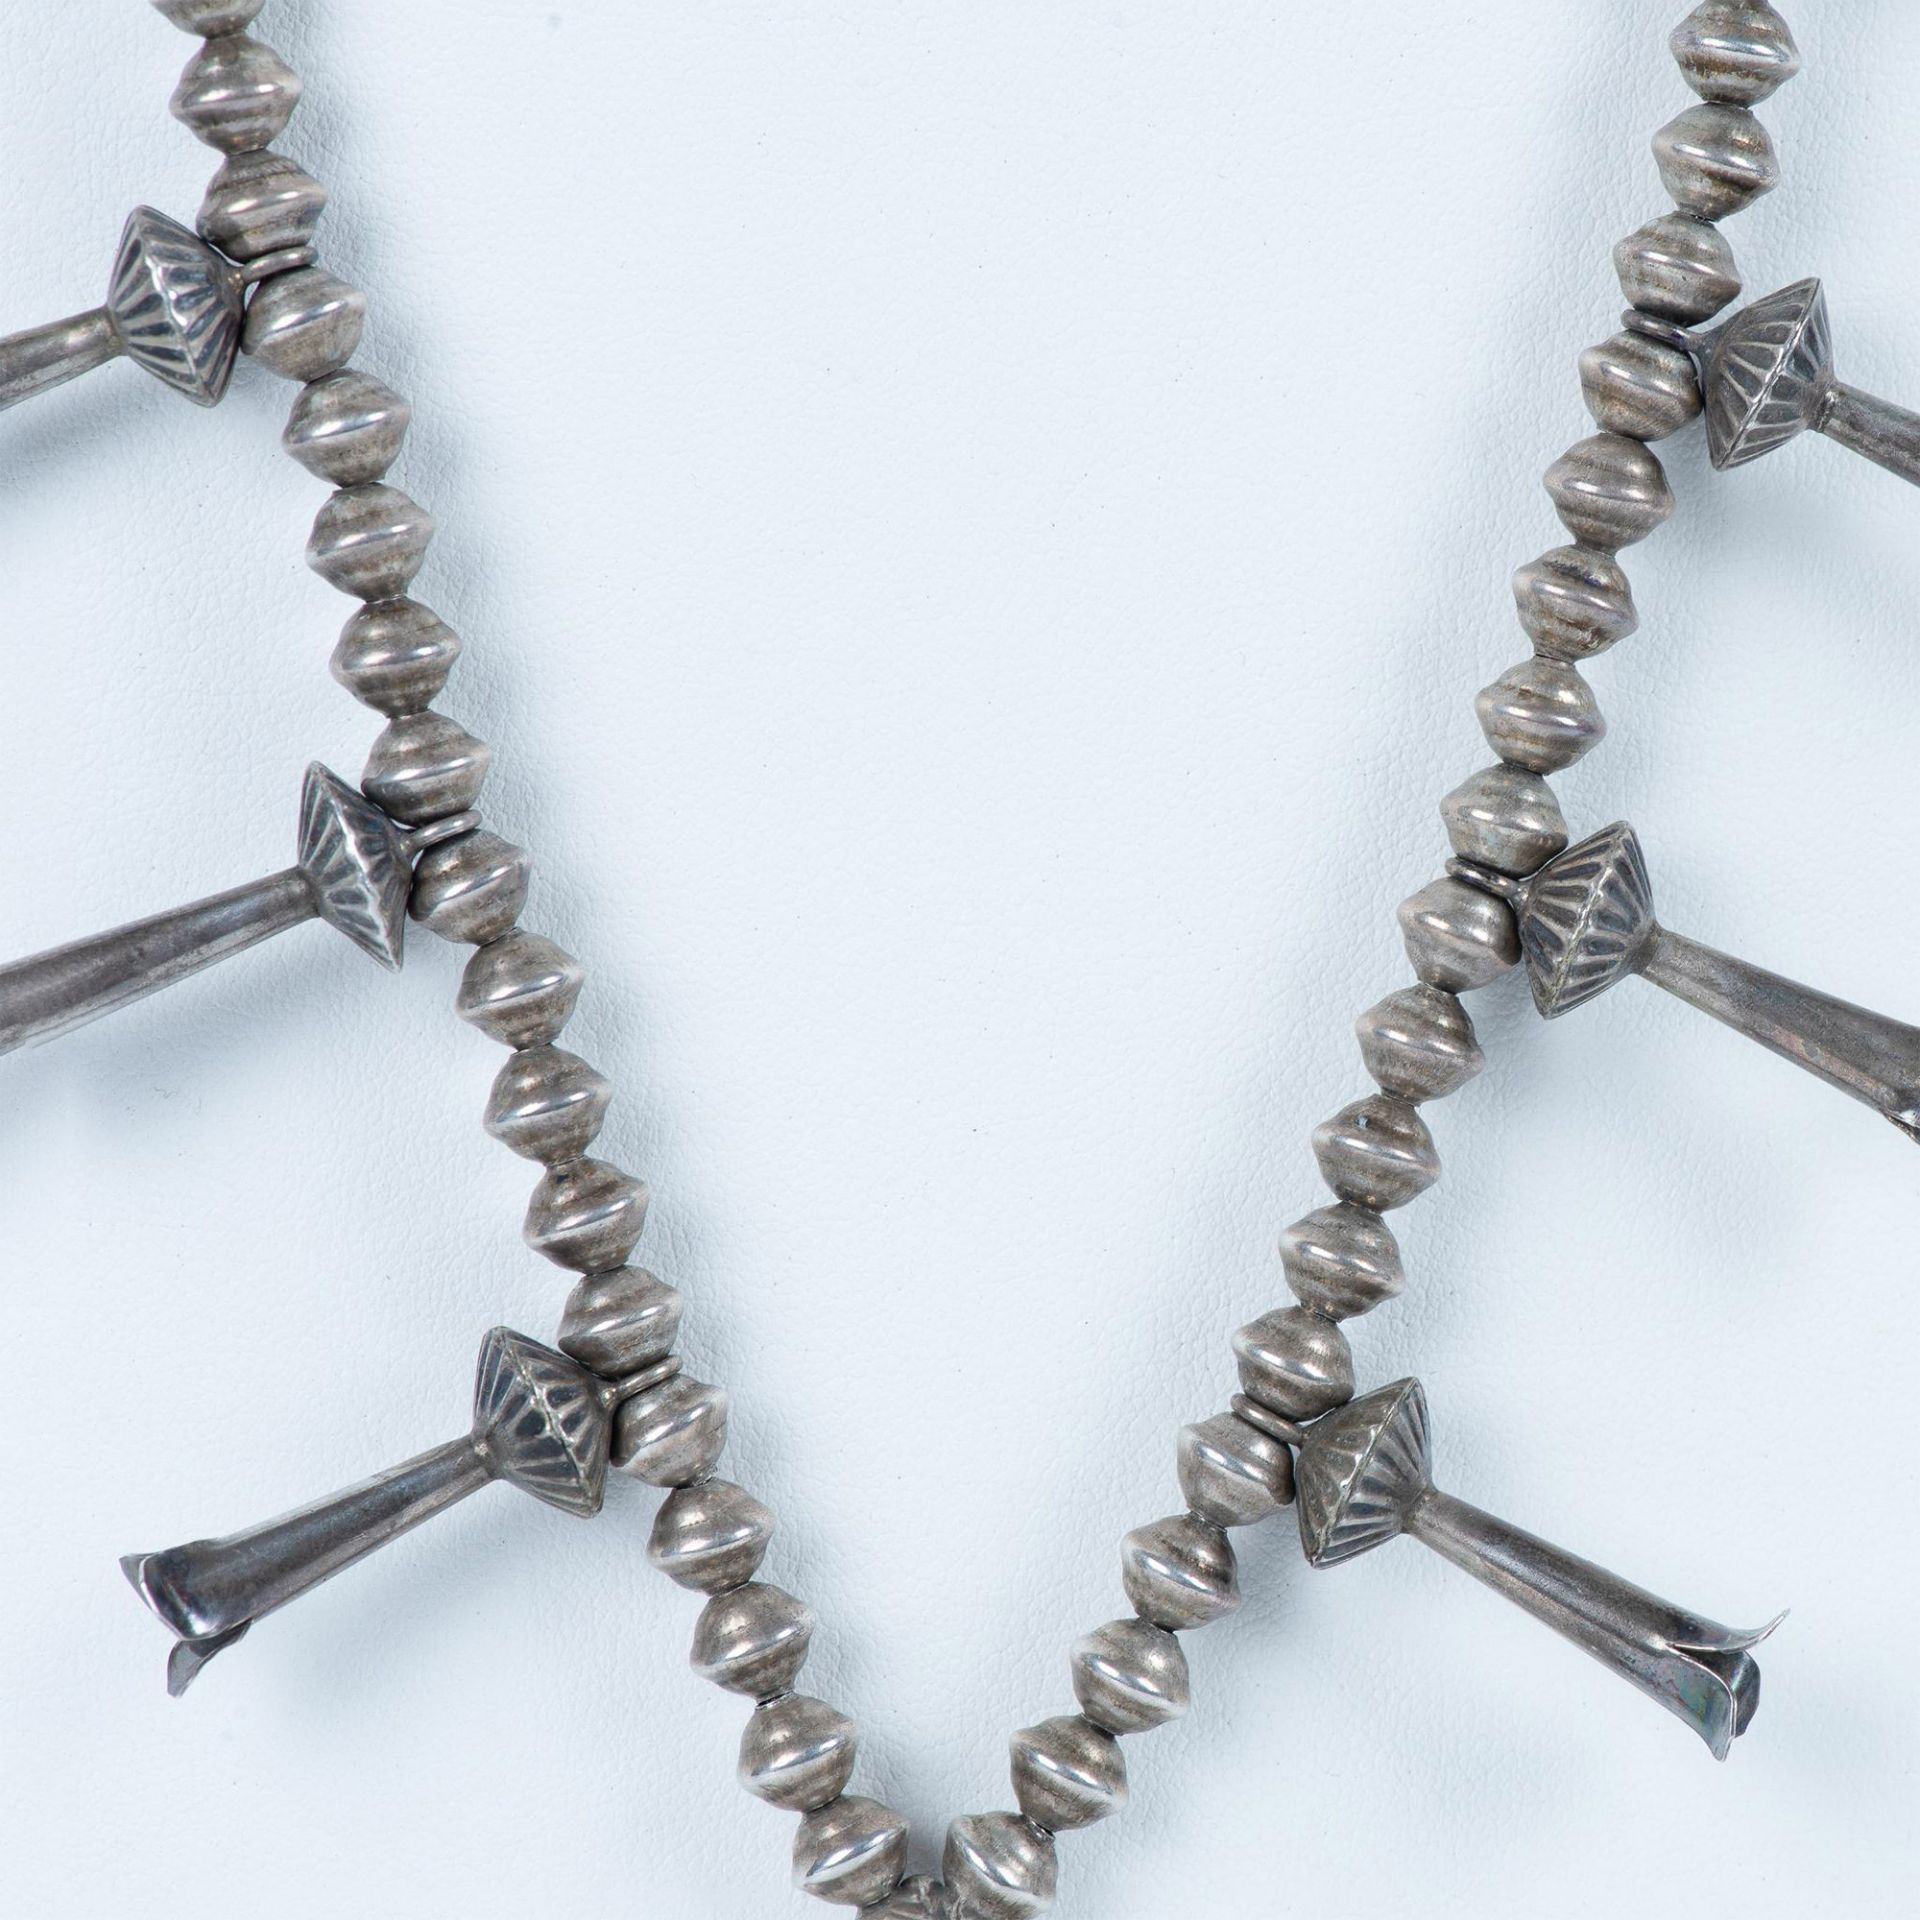 Native American Sterling Silver Squash Blossom Necklace - Image 3 of 5